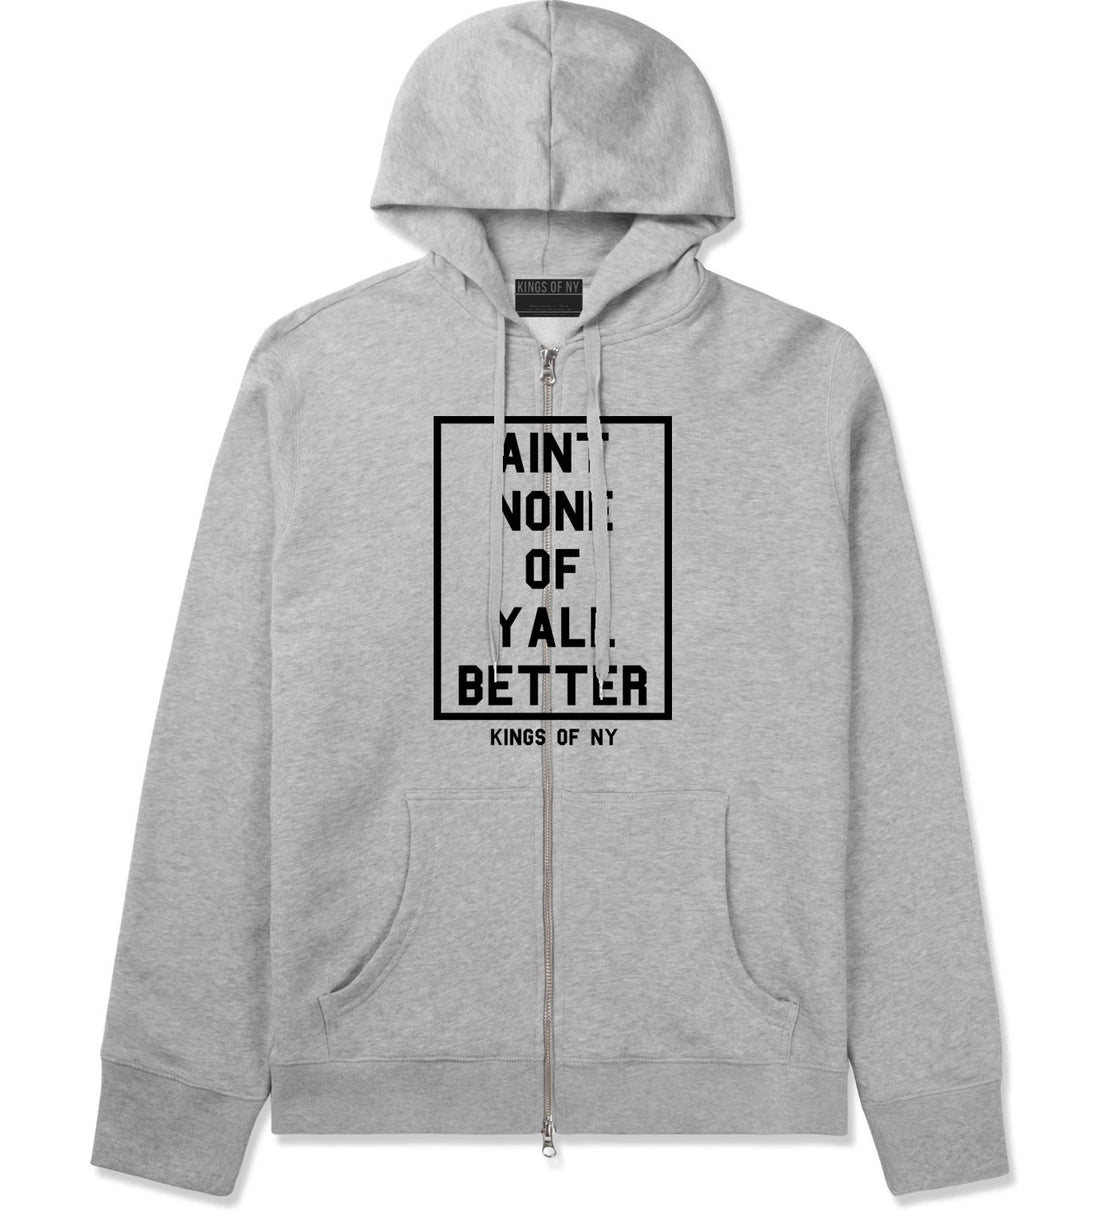 Aint None Of Yall Better Zip Up Hoodie